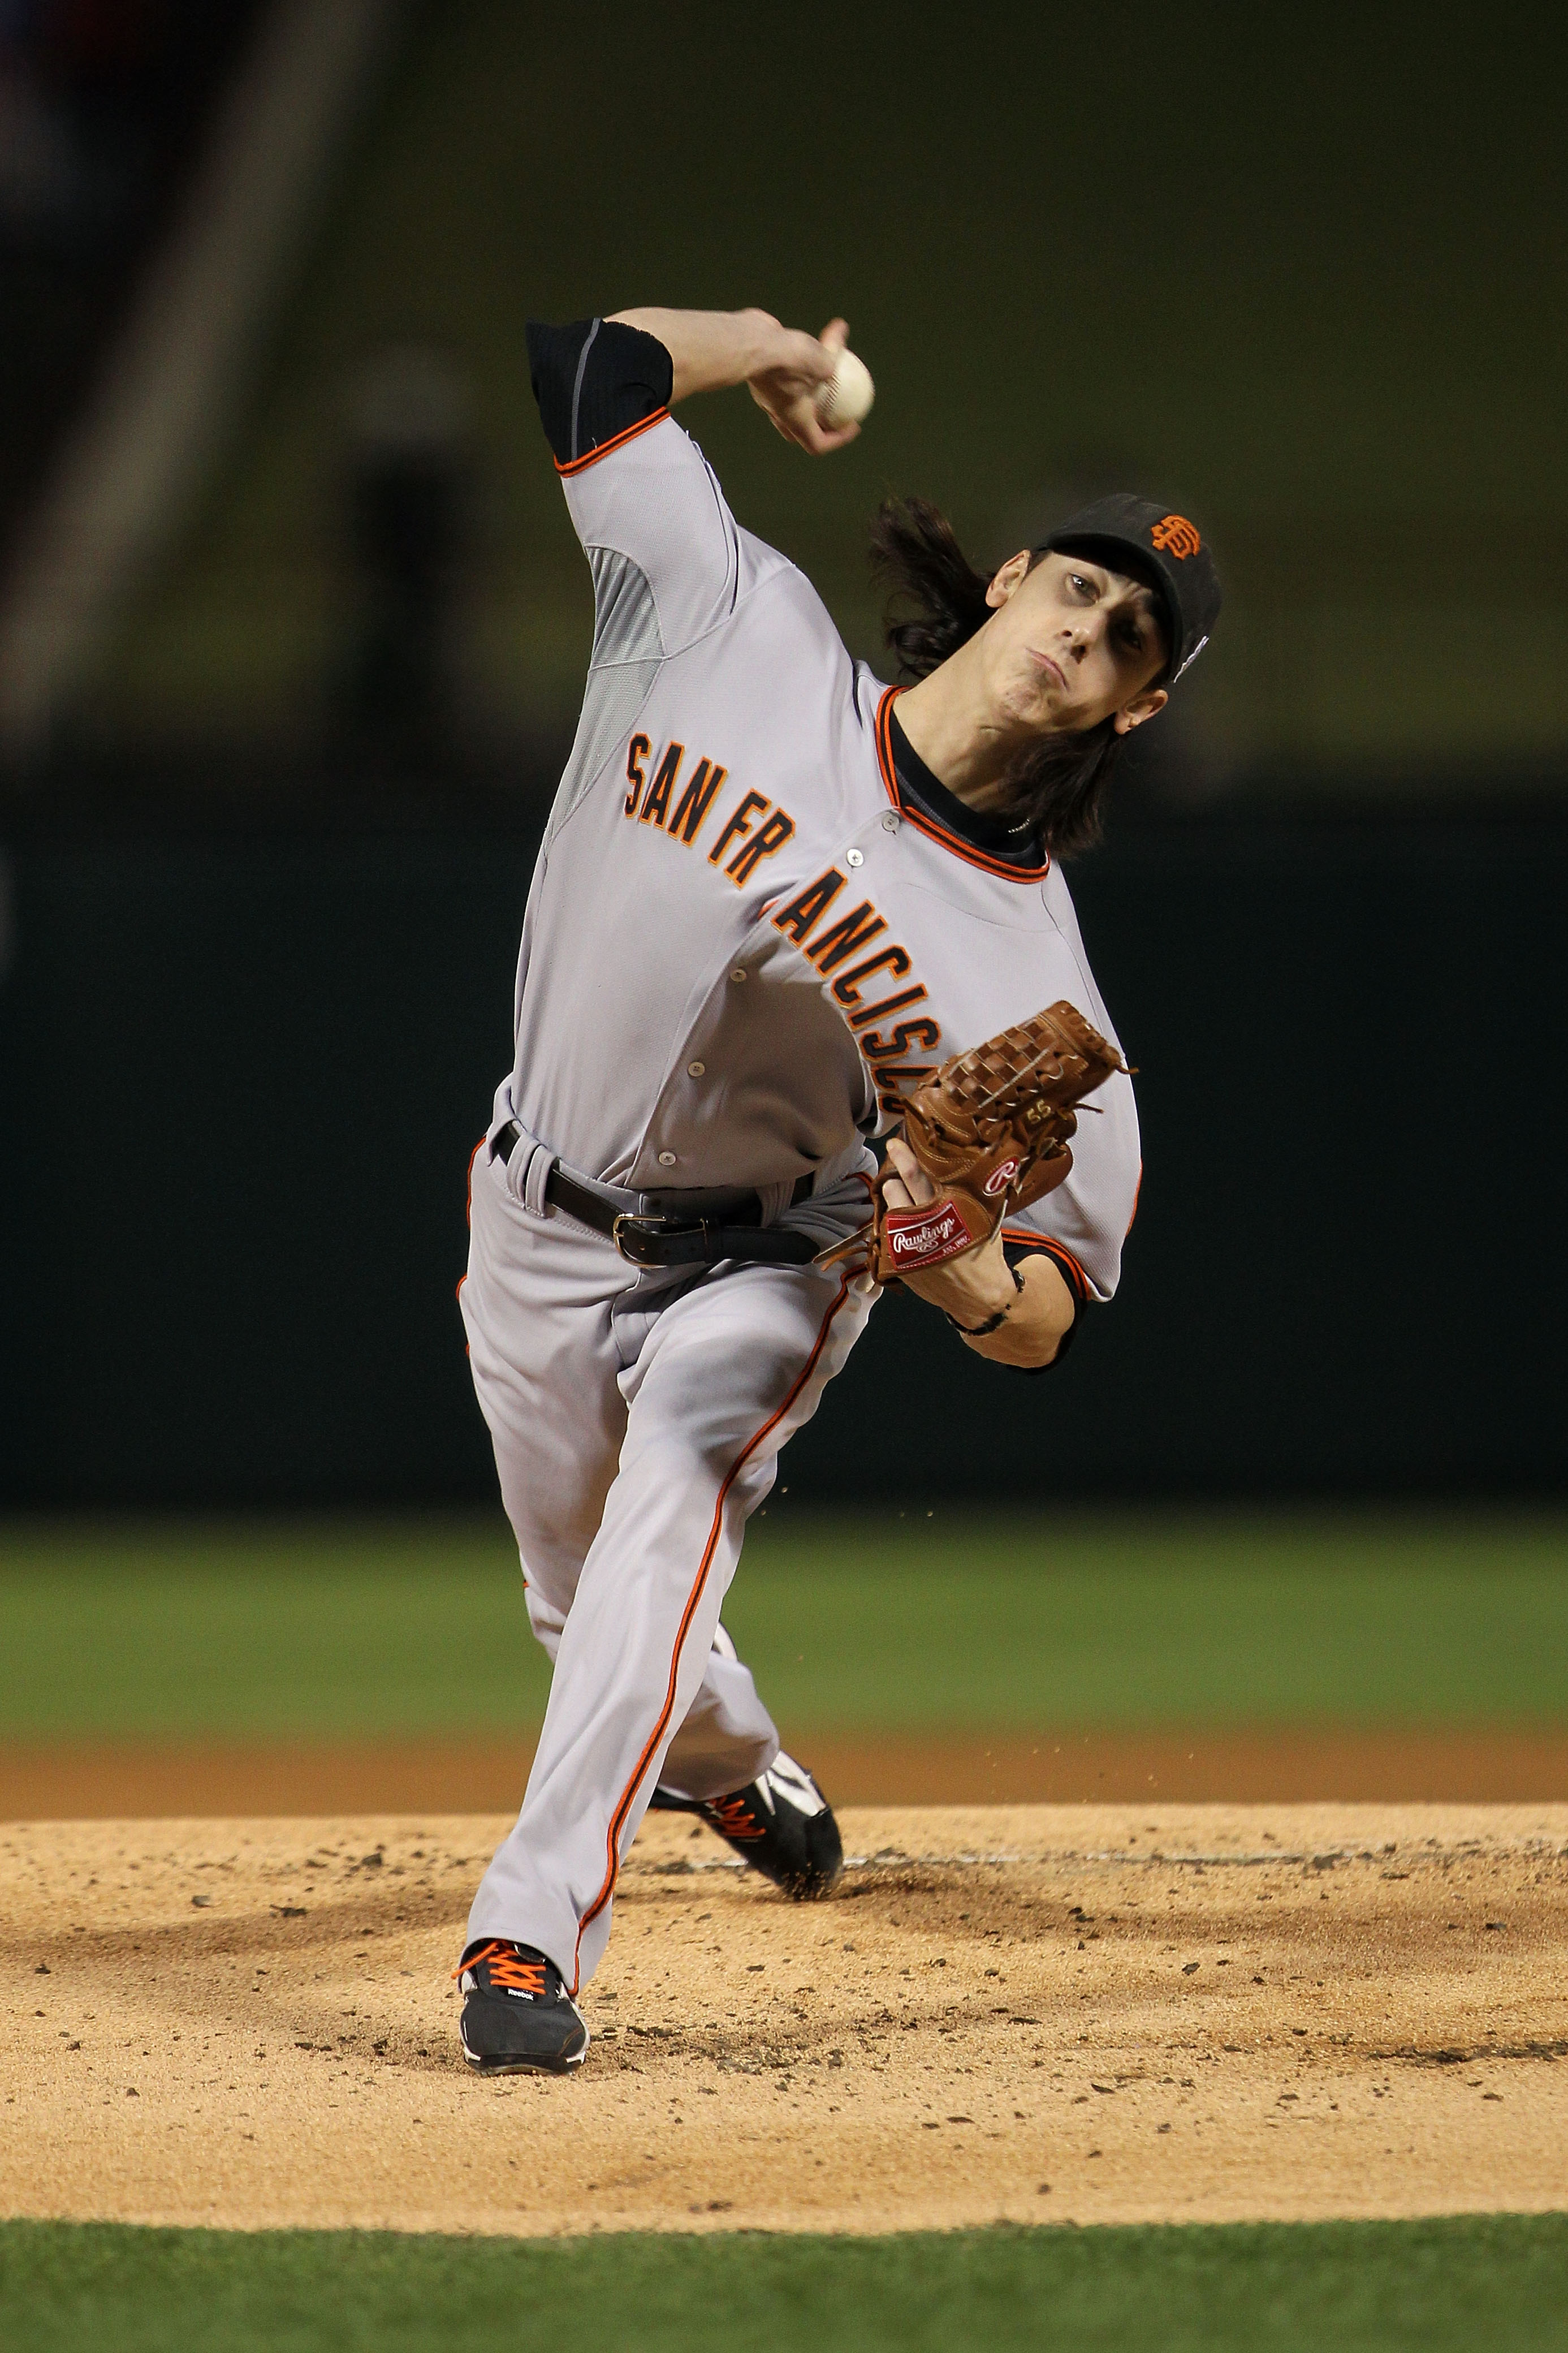 Tim Lincecum waits his turn, still yet to pitch